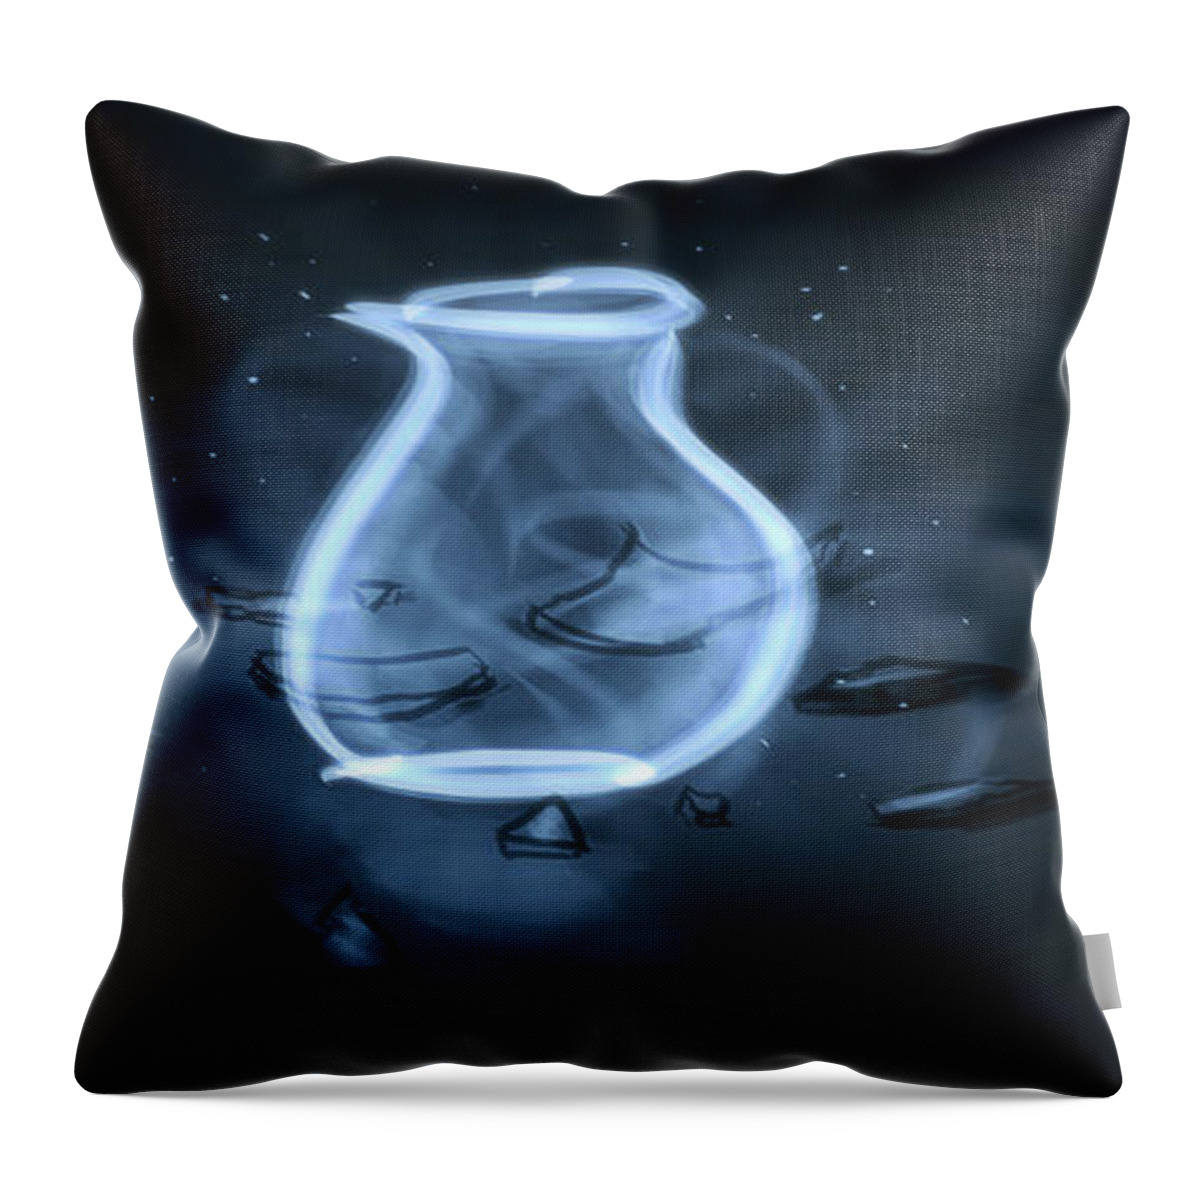 Darkness Throw Pillow featuring the digital art Art - It Is Possible by Matthias Zegveld